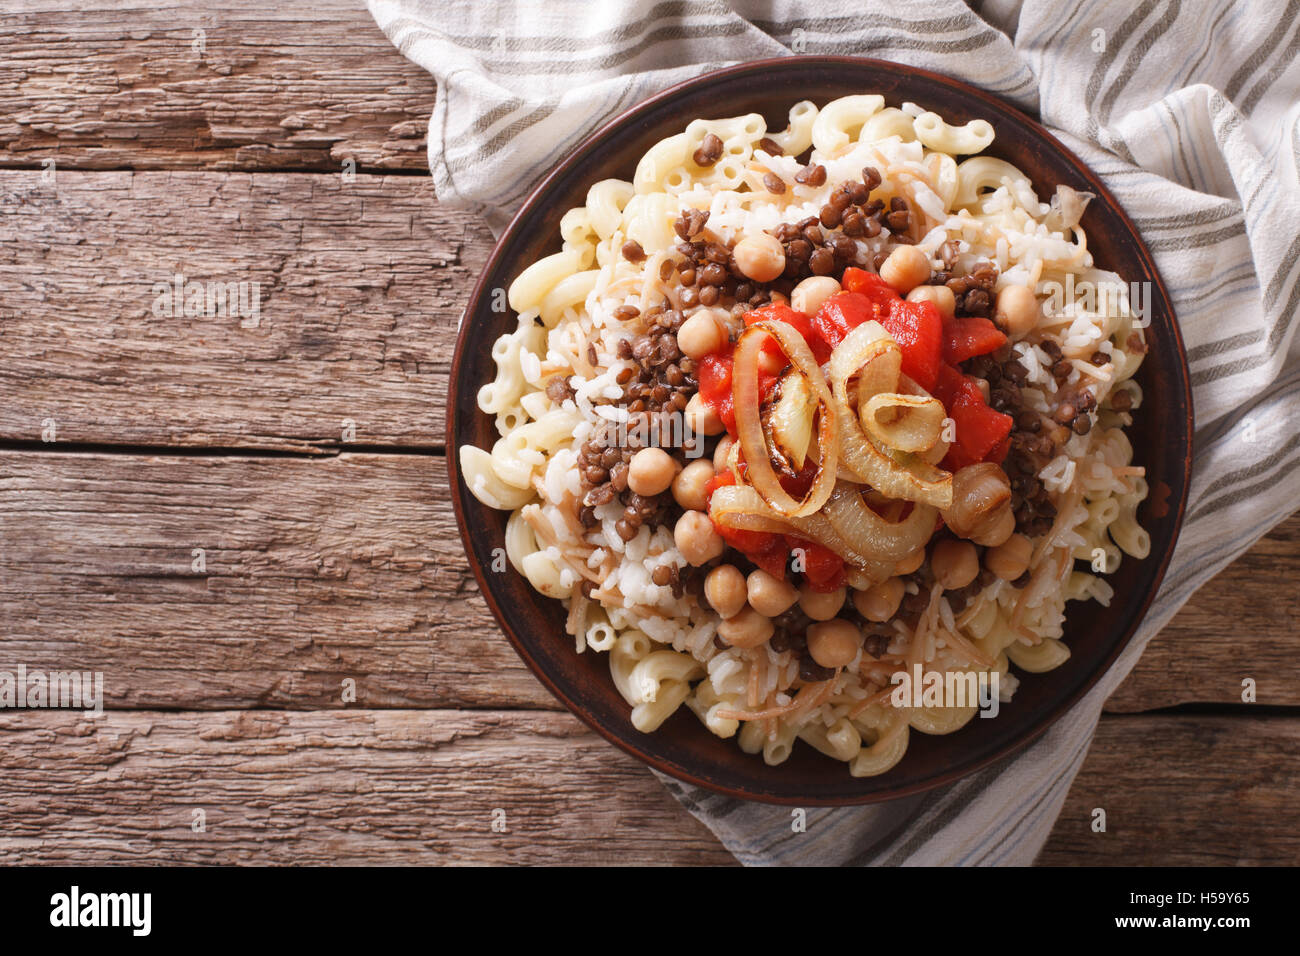 Arabic cuisine: kushari of rice, pasta, chickpeas and lentils on a plate horizontal top view Stock Photo